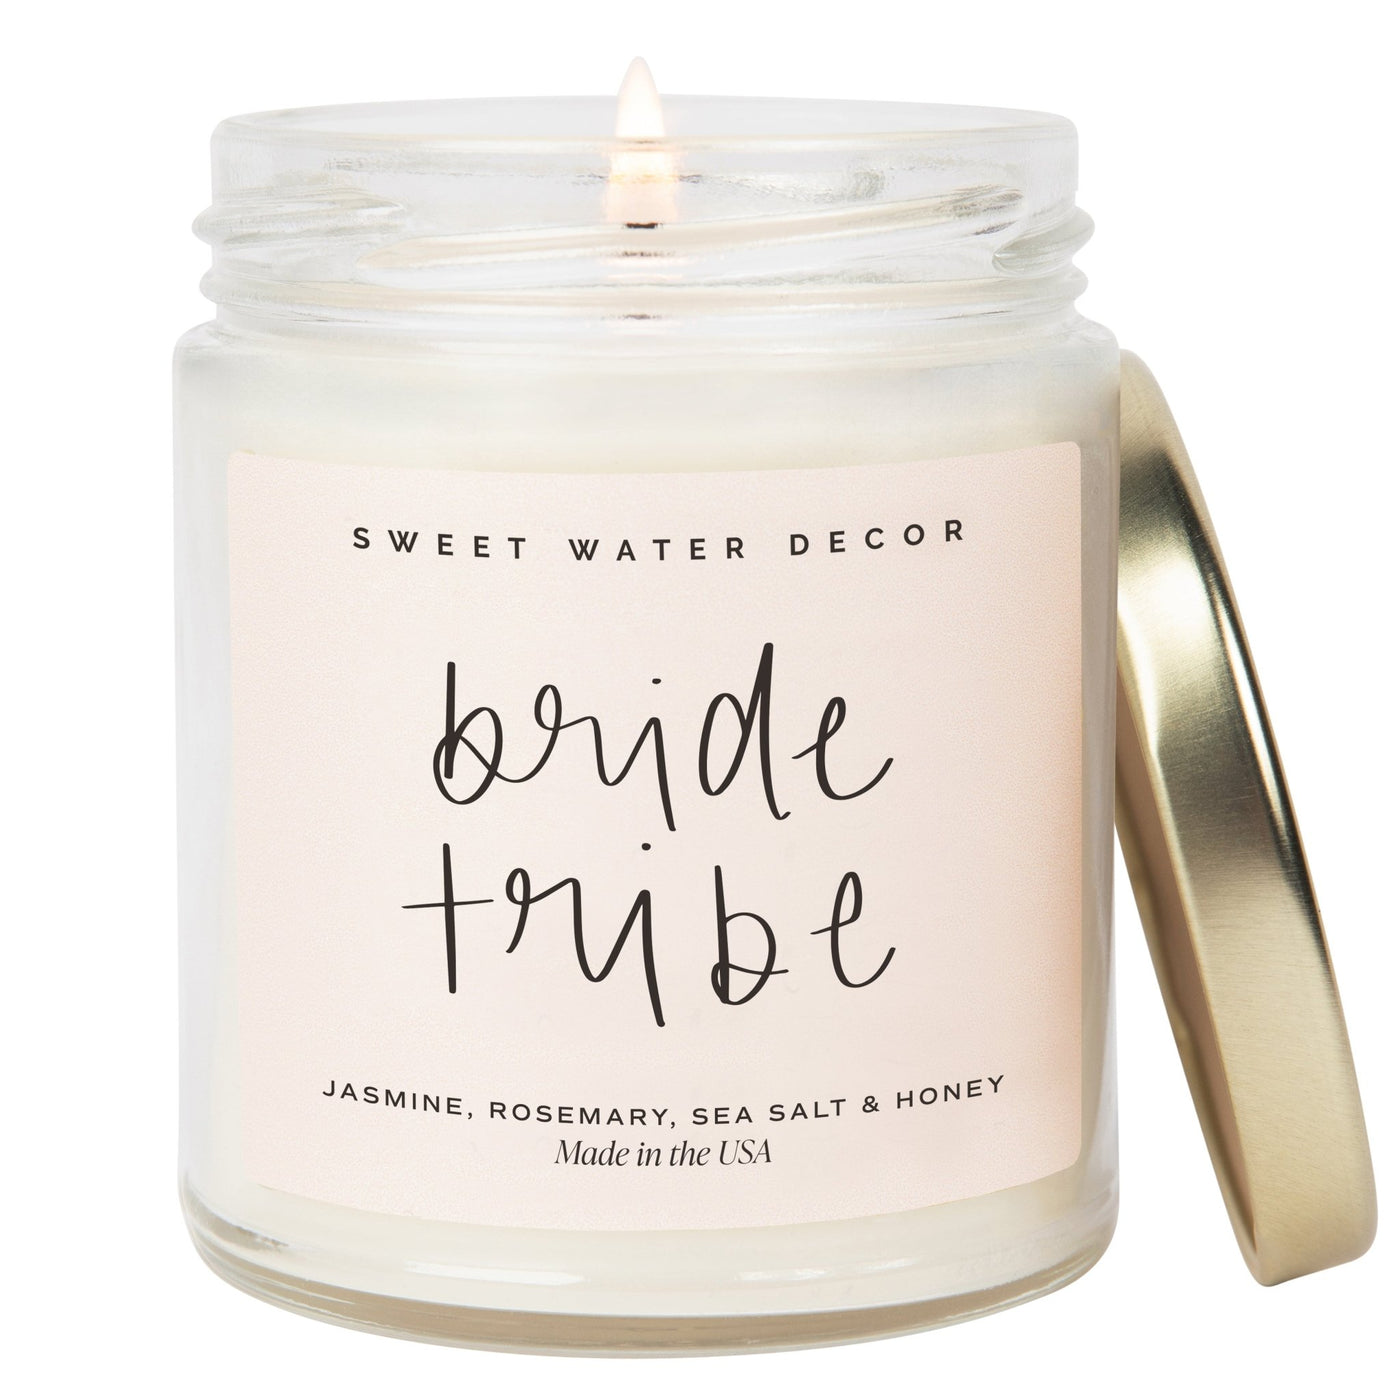 Bride Tribe Soy Candle - Clear Jar - 9 oz (Wildflowers and Salt) - Sweet Water Decor - Candles